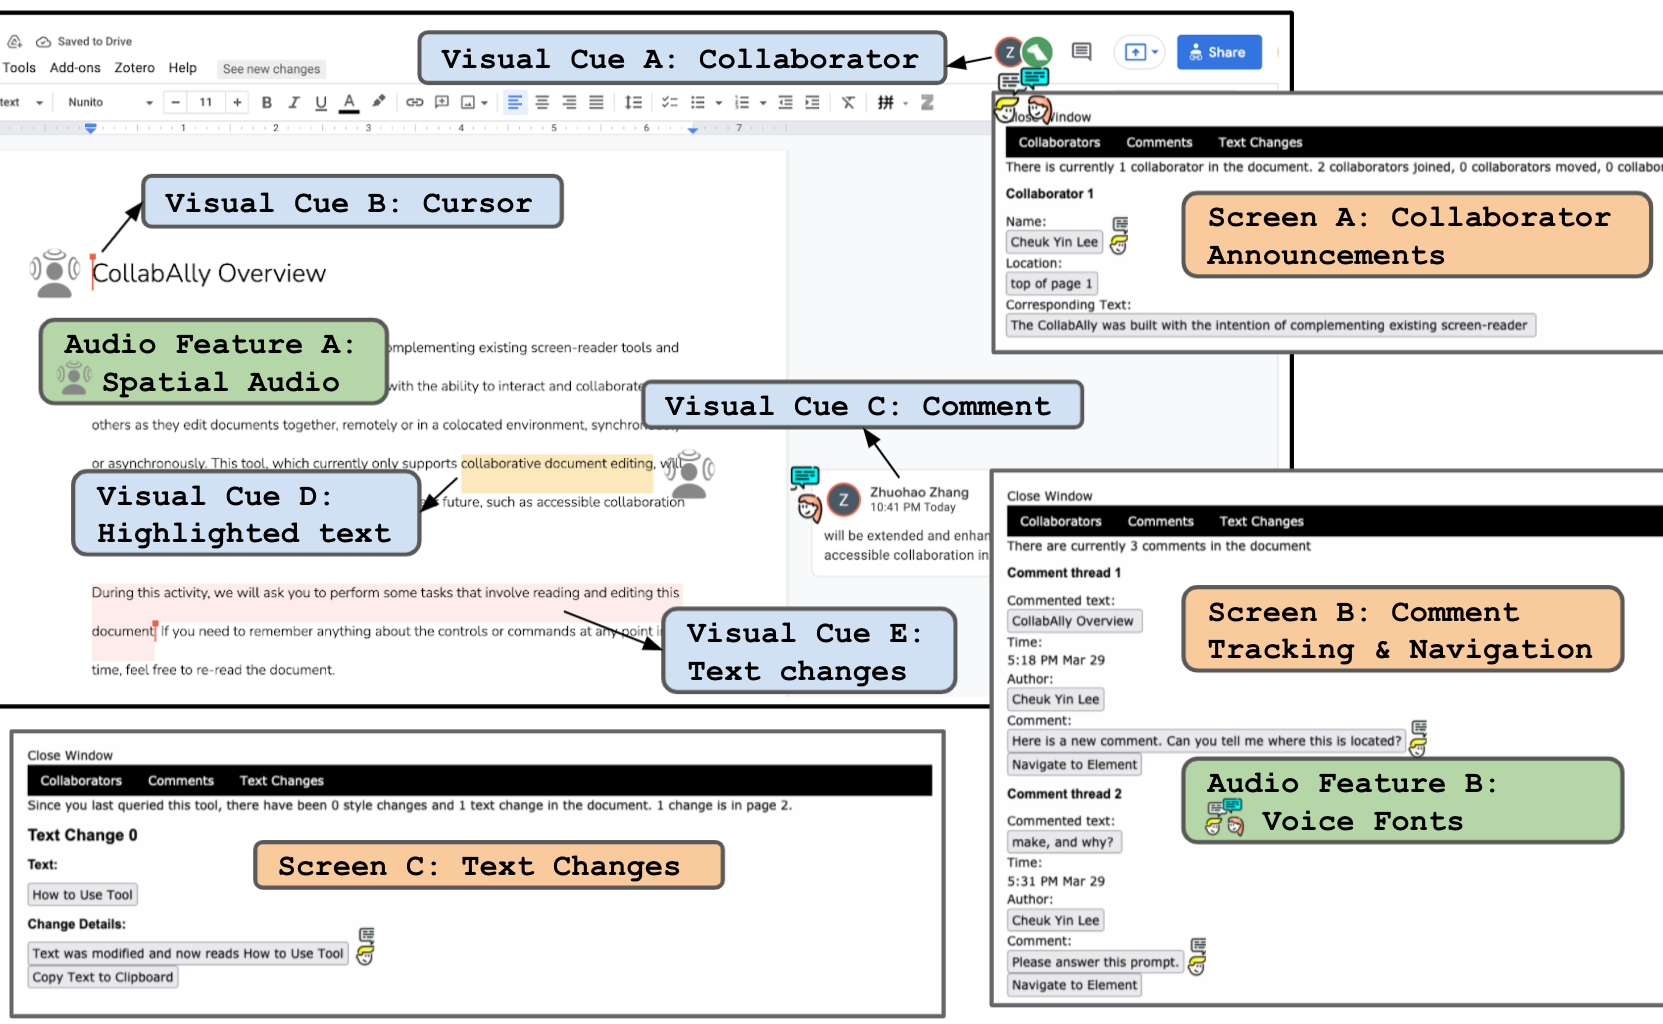 CollabAlly system overview: (i) Extracts visual cue information from Google Doc's HTML DOM tree, including collaborators, cursors, comments, highlighted text, and text differences; (ii) Parses this data into a readable format and display it in three pop-up dialog boxes on-demand: (a) enhanced collaborator announcements, (b) comment tracking and navigation, (c) real-time and asynchronous text changes; (iii) Conveys contextual information using audio features, including spatial audio and voice fonts. The figure shows a Google doc page and 3 interfaces of CollabAlly dialog boxes. The annotations also include different visual cues (collaborator, cursor, comment, highlighted text, and text changes) and audio features (spatial audio and voice fonts).